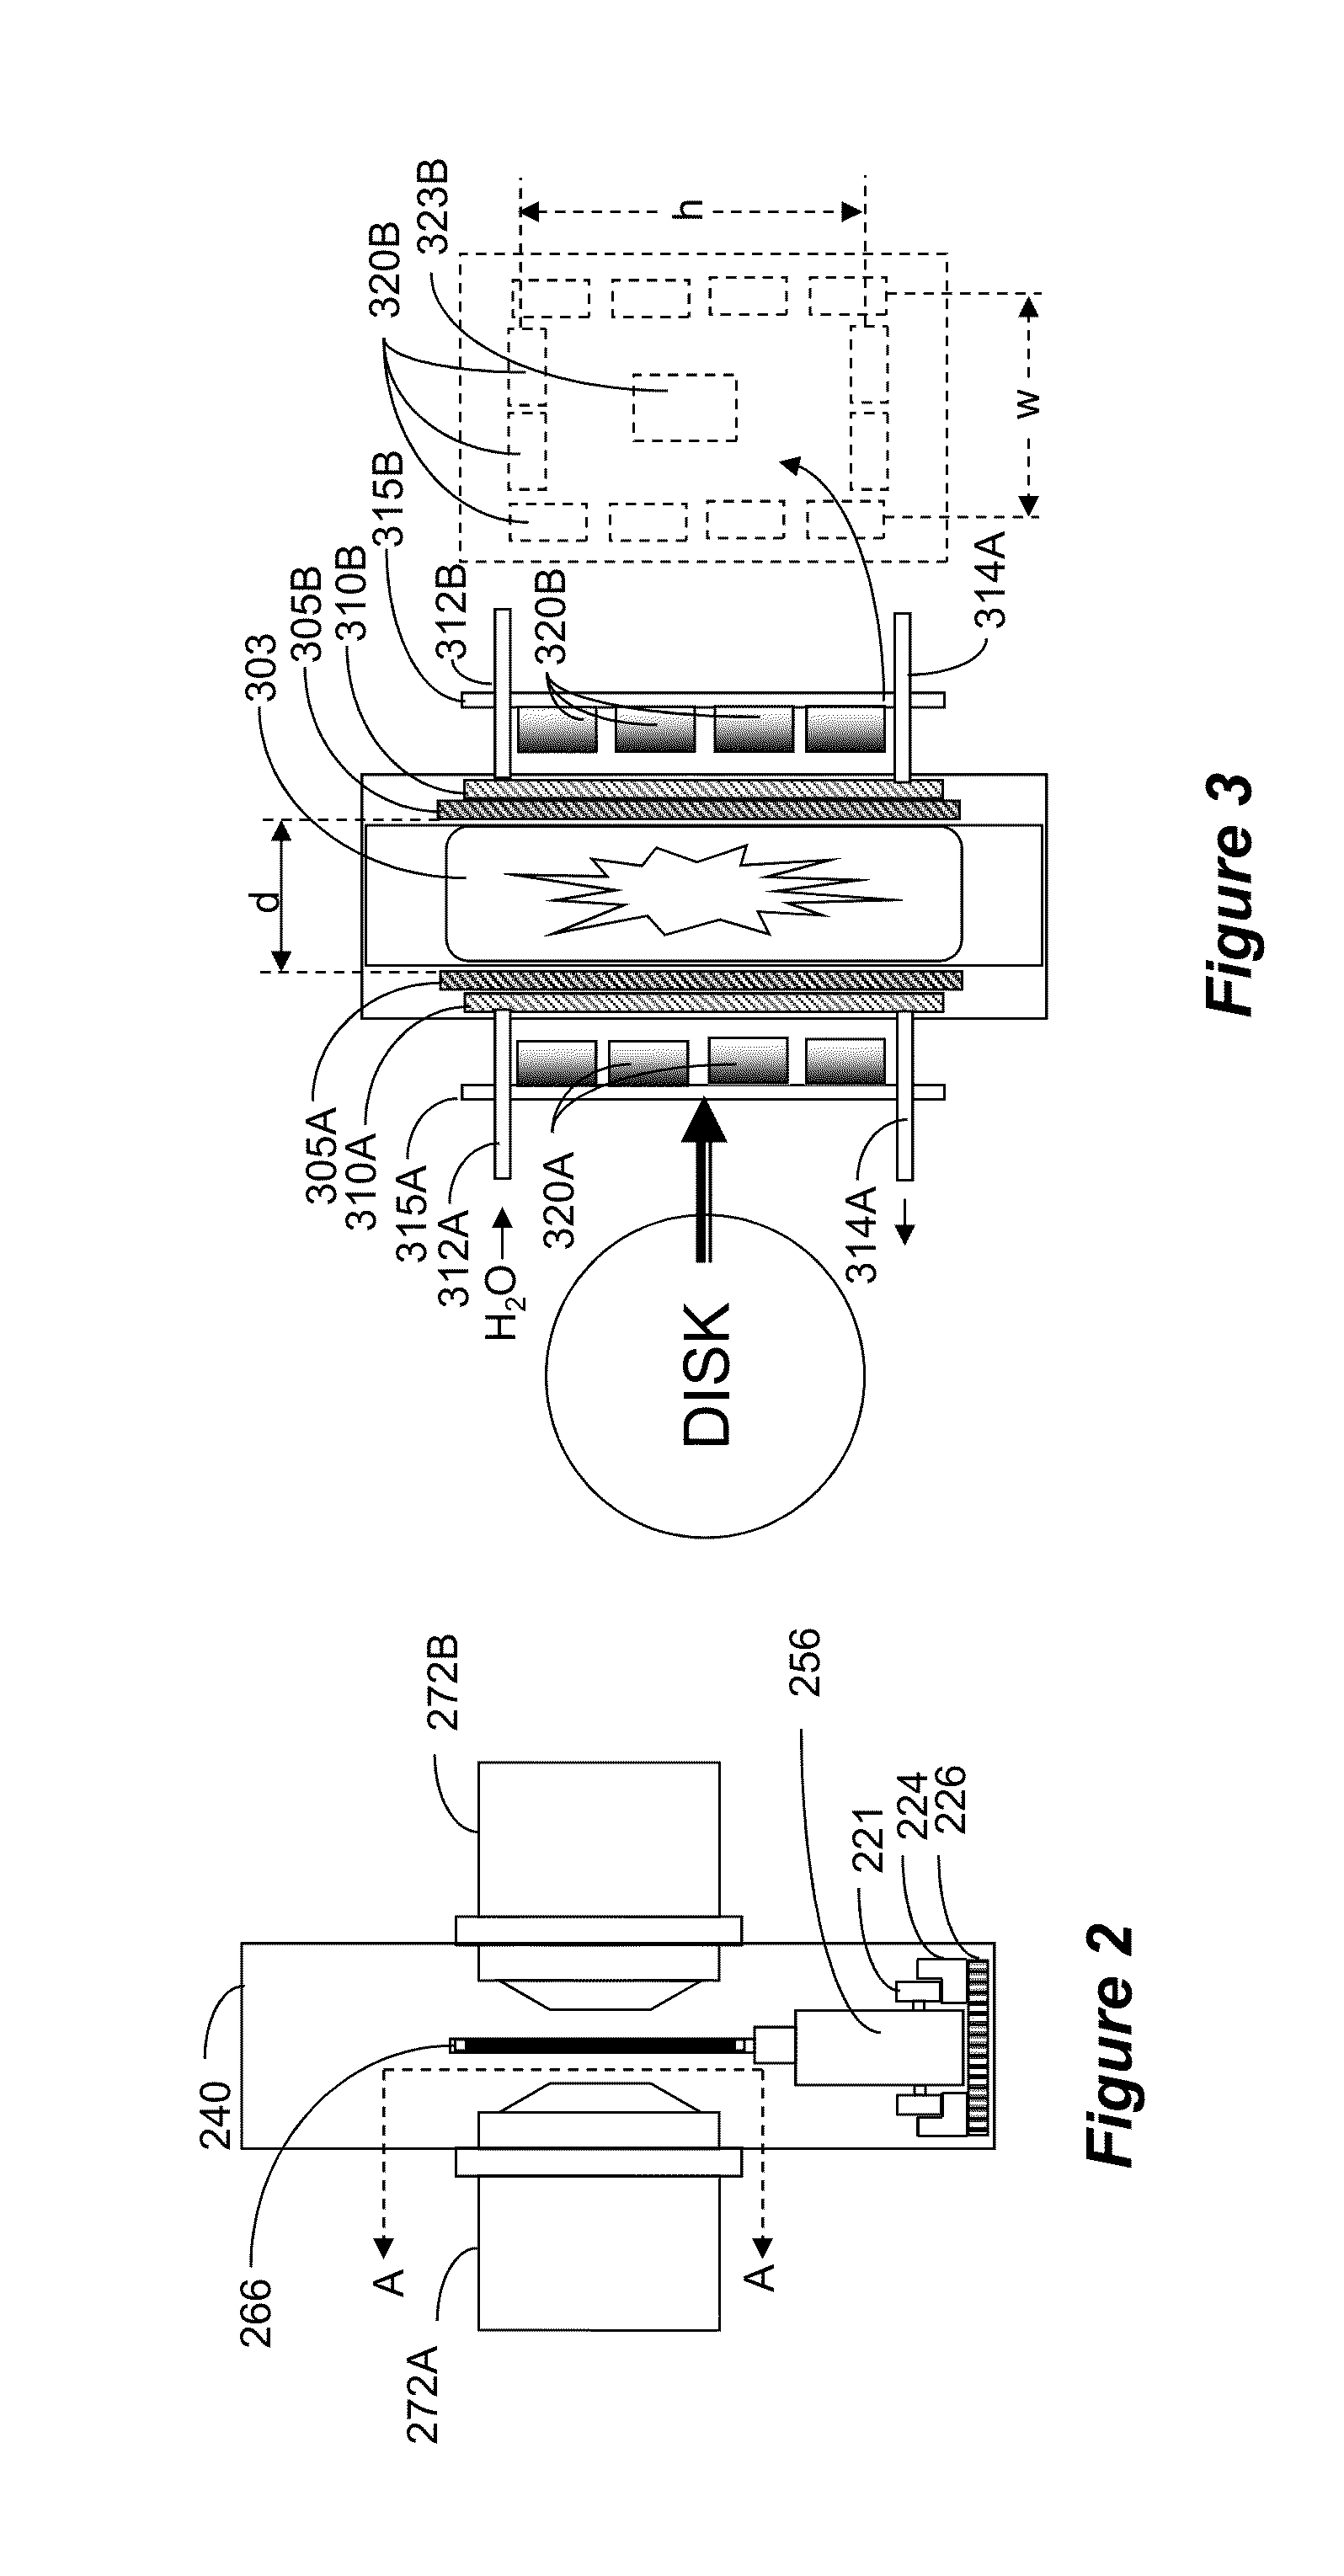 Method and apparatus to produce high density overcoats